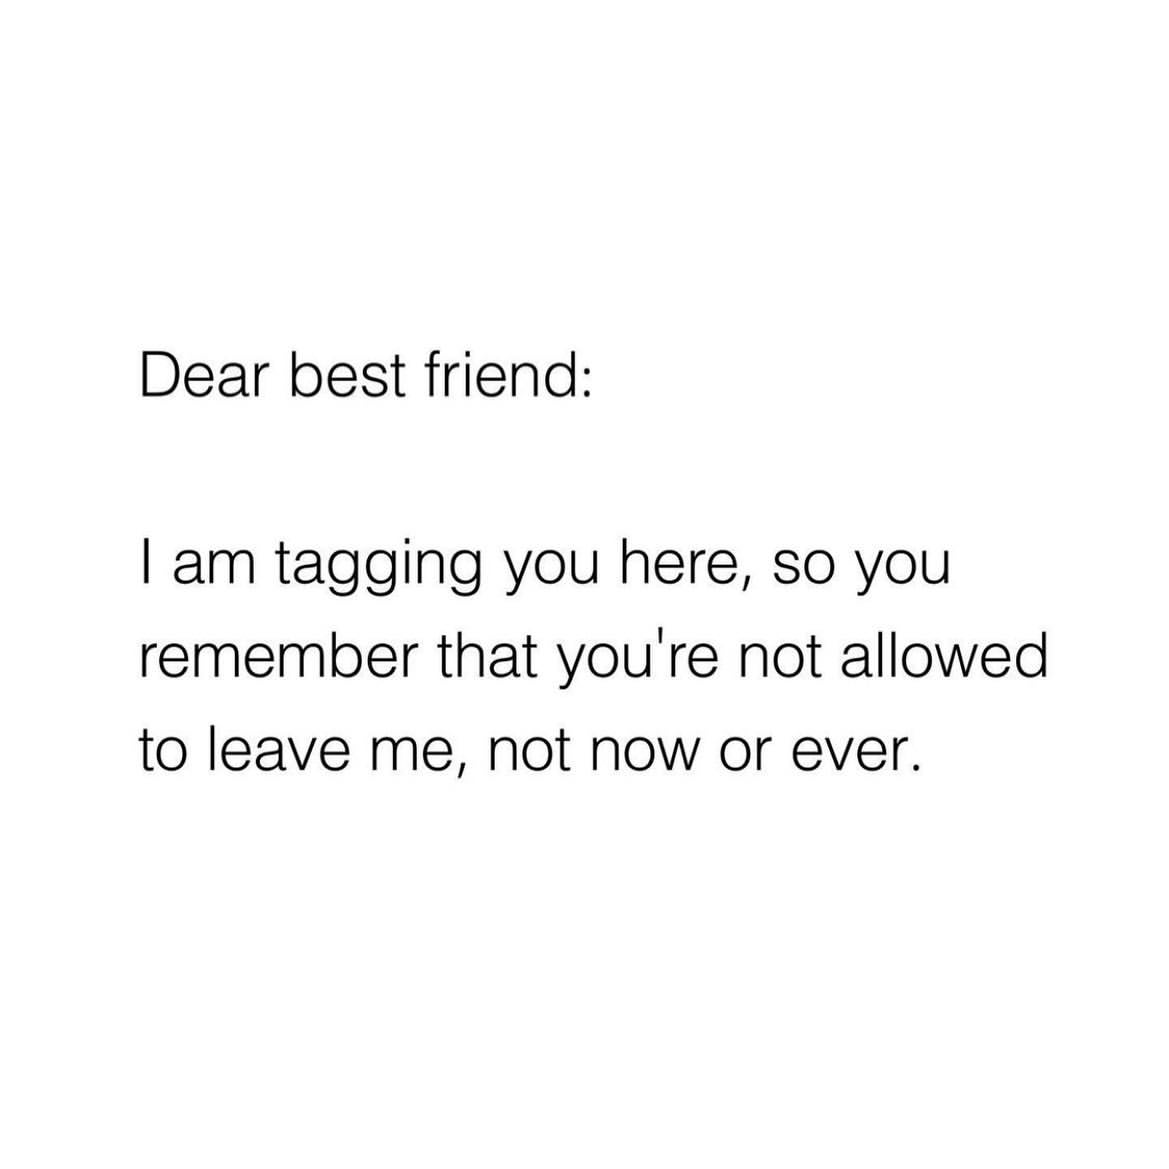 Dear best friend: I am tagging you here, so you remember that you're not allowed to leave me, not now or ever.